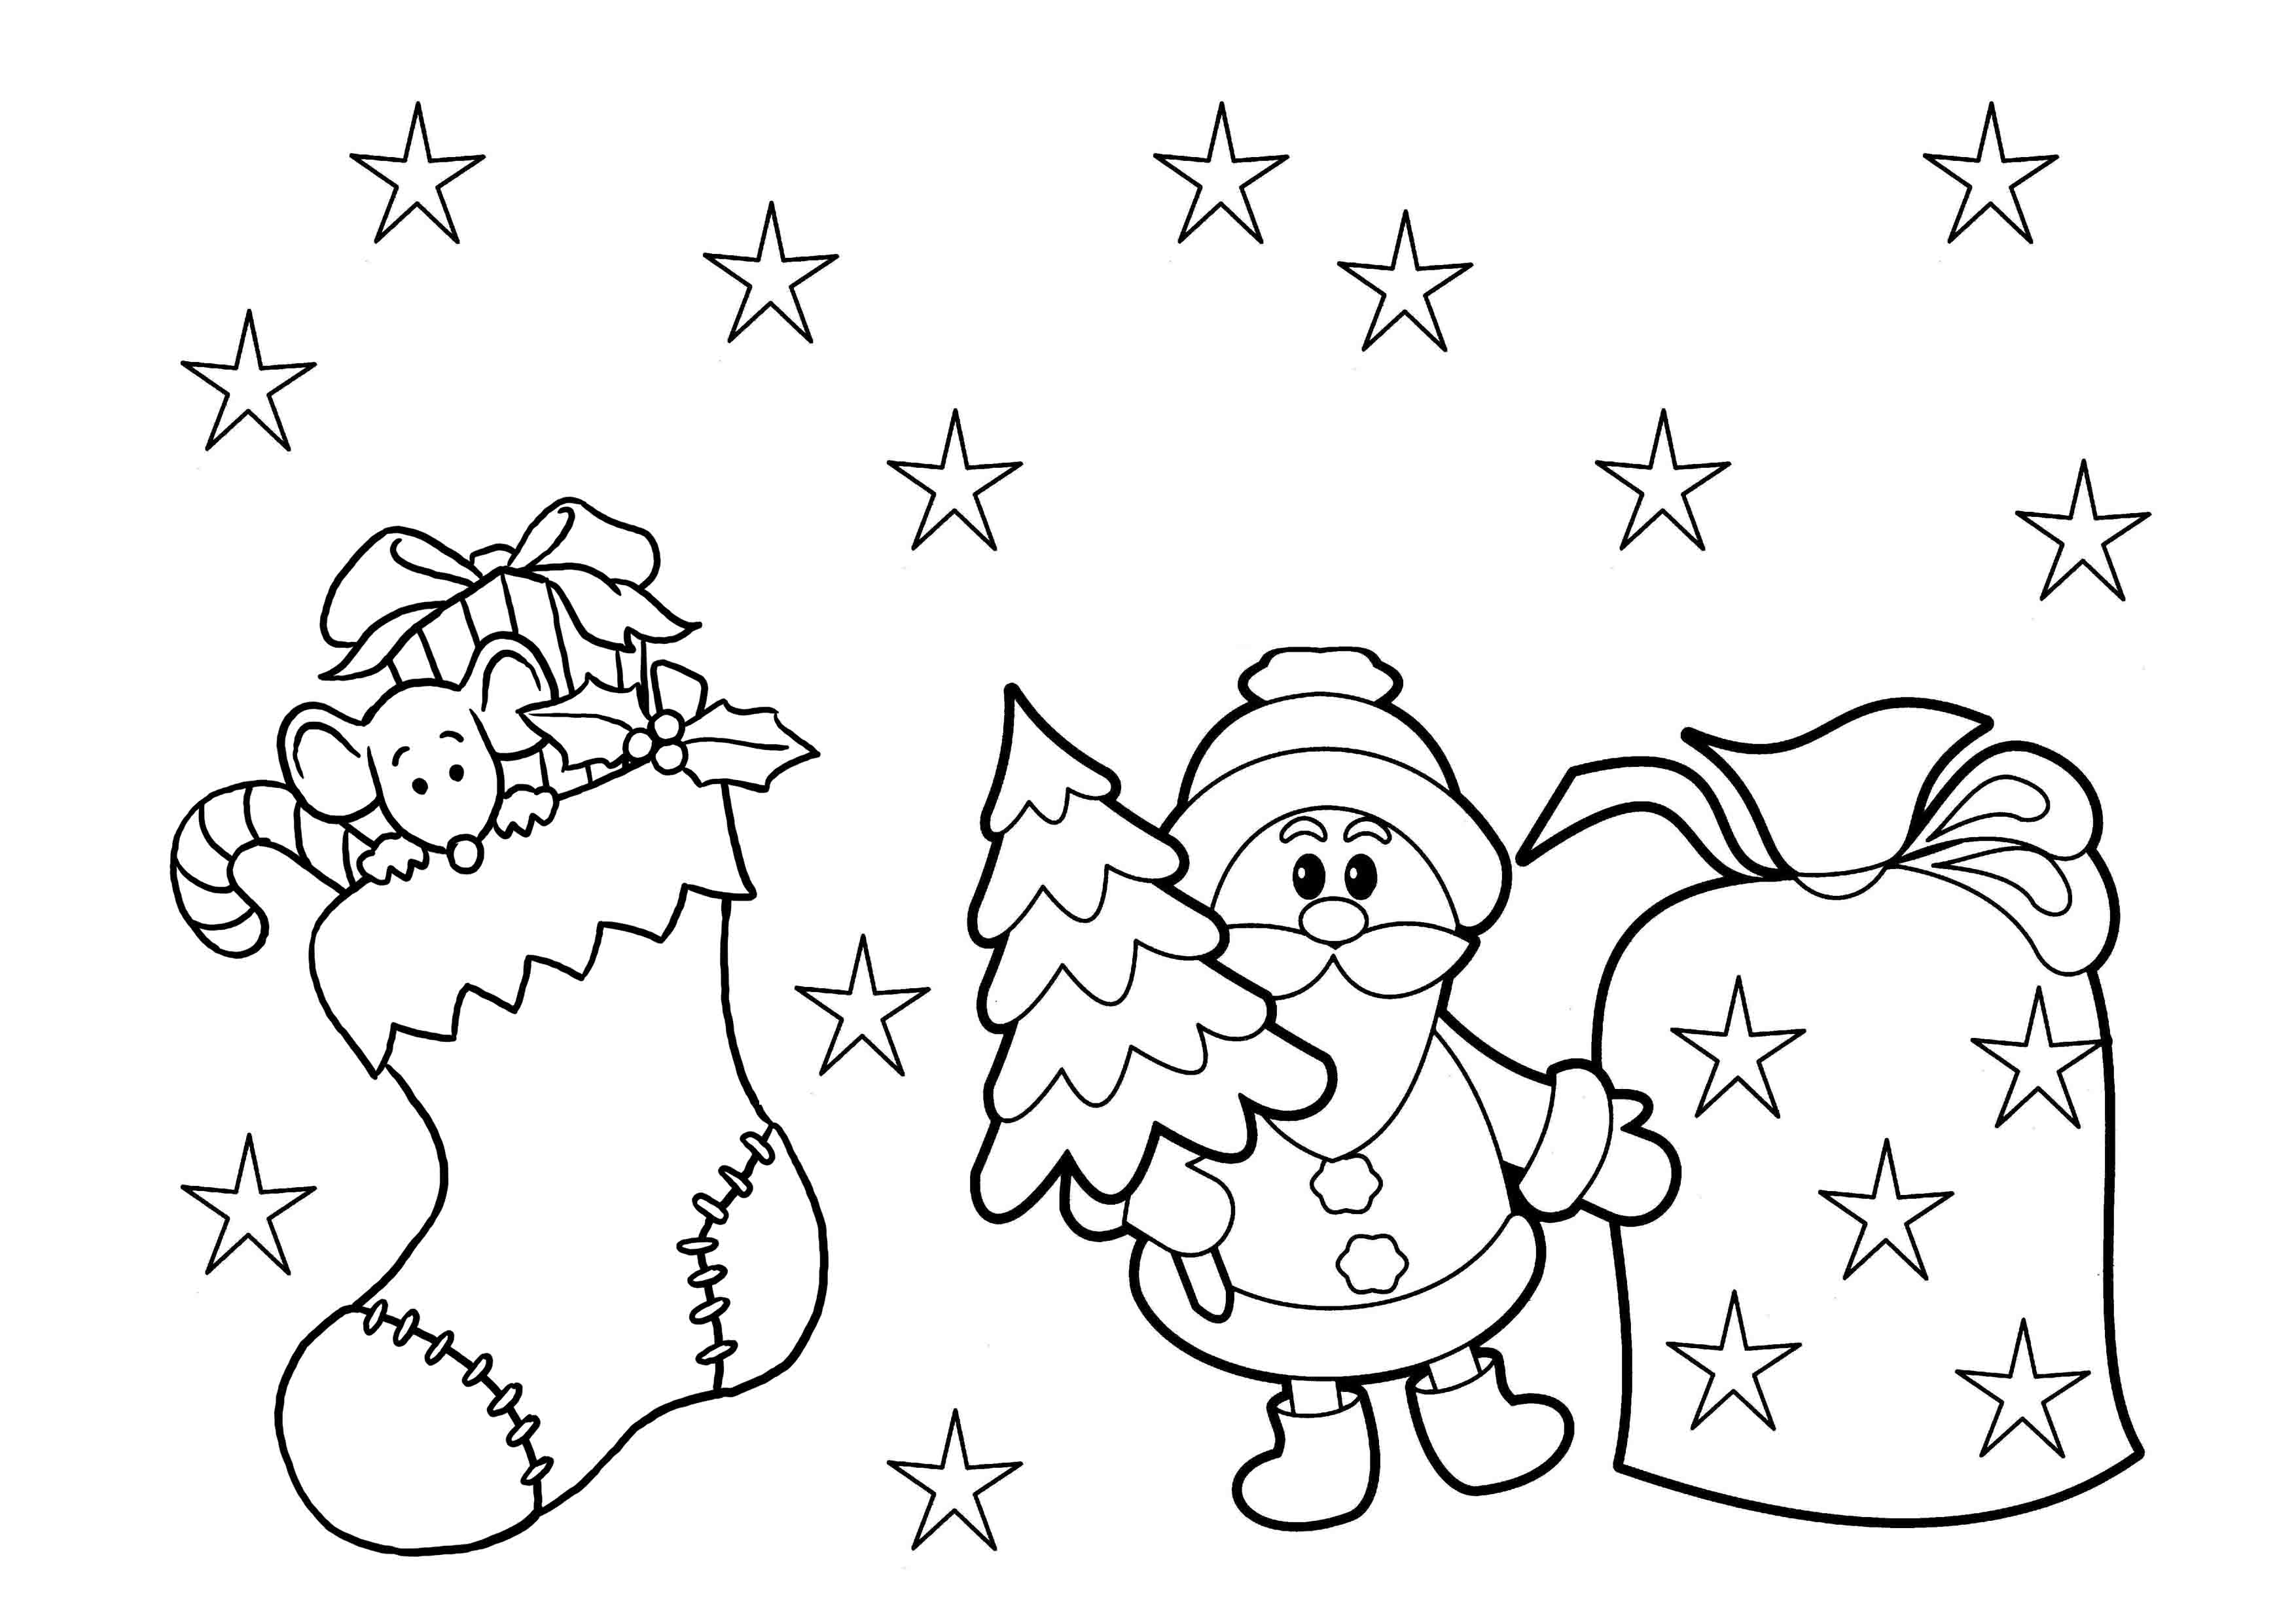 Children's Christmas Coloring Pages Free Coloring Christmas Coloring Pages For Preschoolers Free Printable